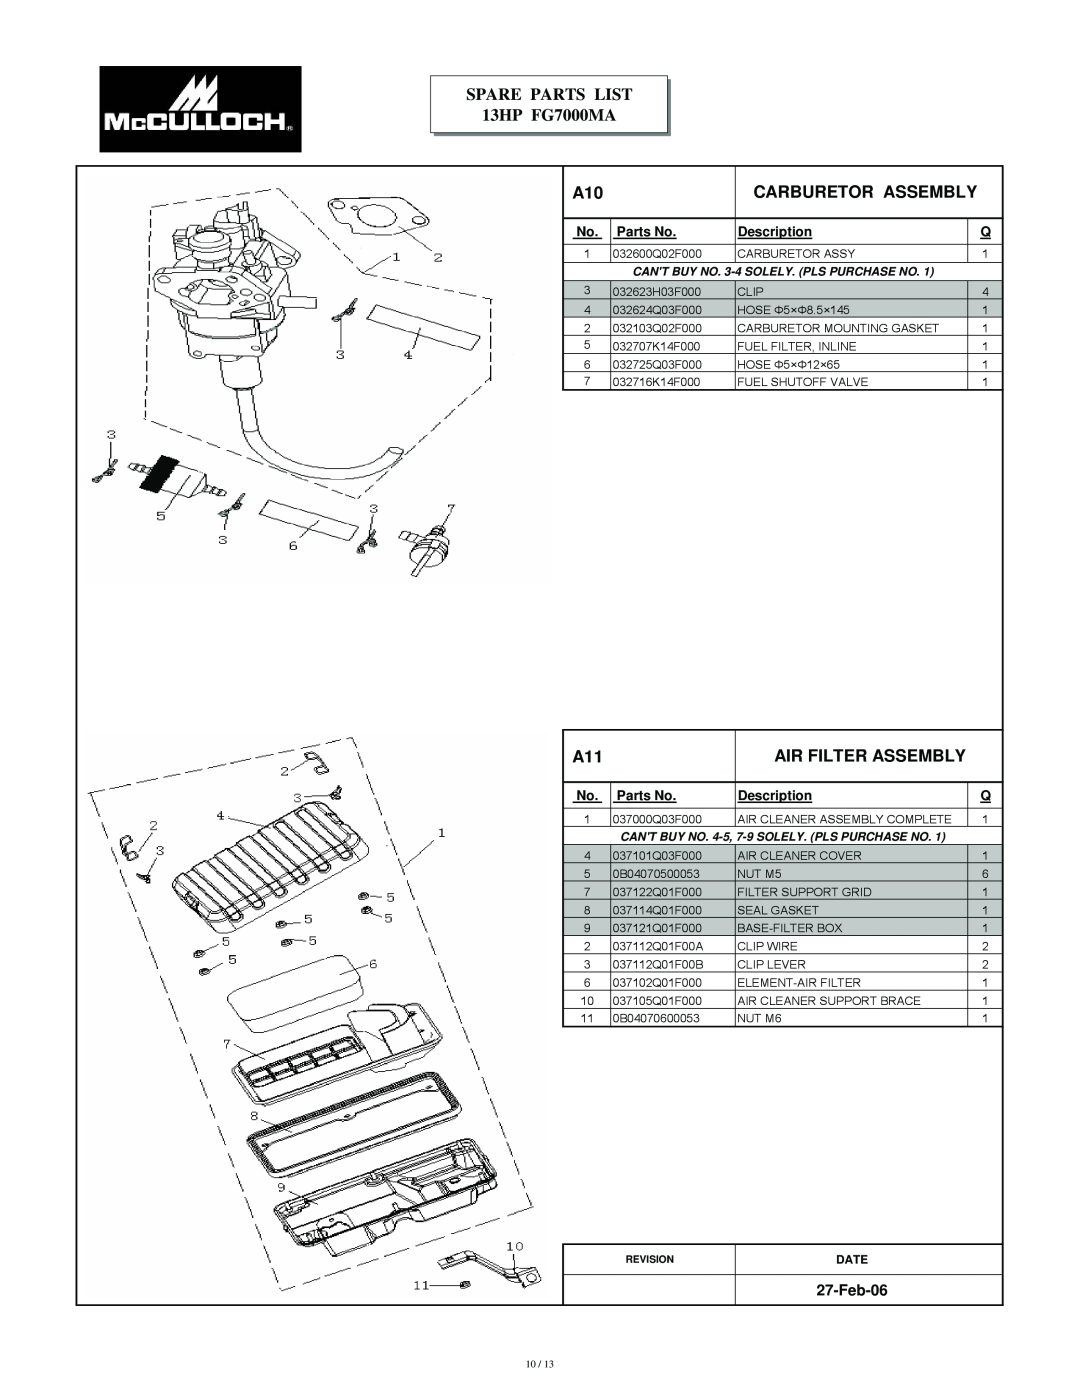 McCulloch 7096-FG7008 Carburetor Assembly, Air Filter Assembly, SPARE PARTS LIST 13HP FG7000MA, Feb-06, Parts No, Date 